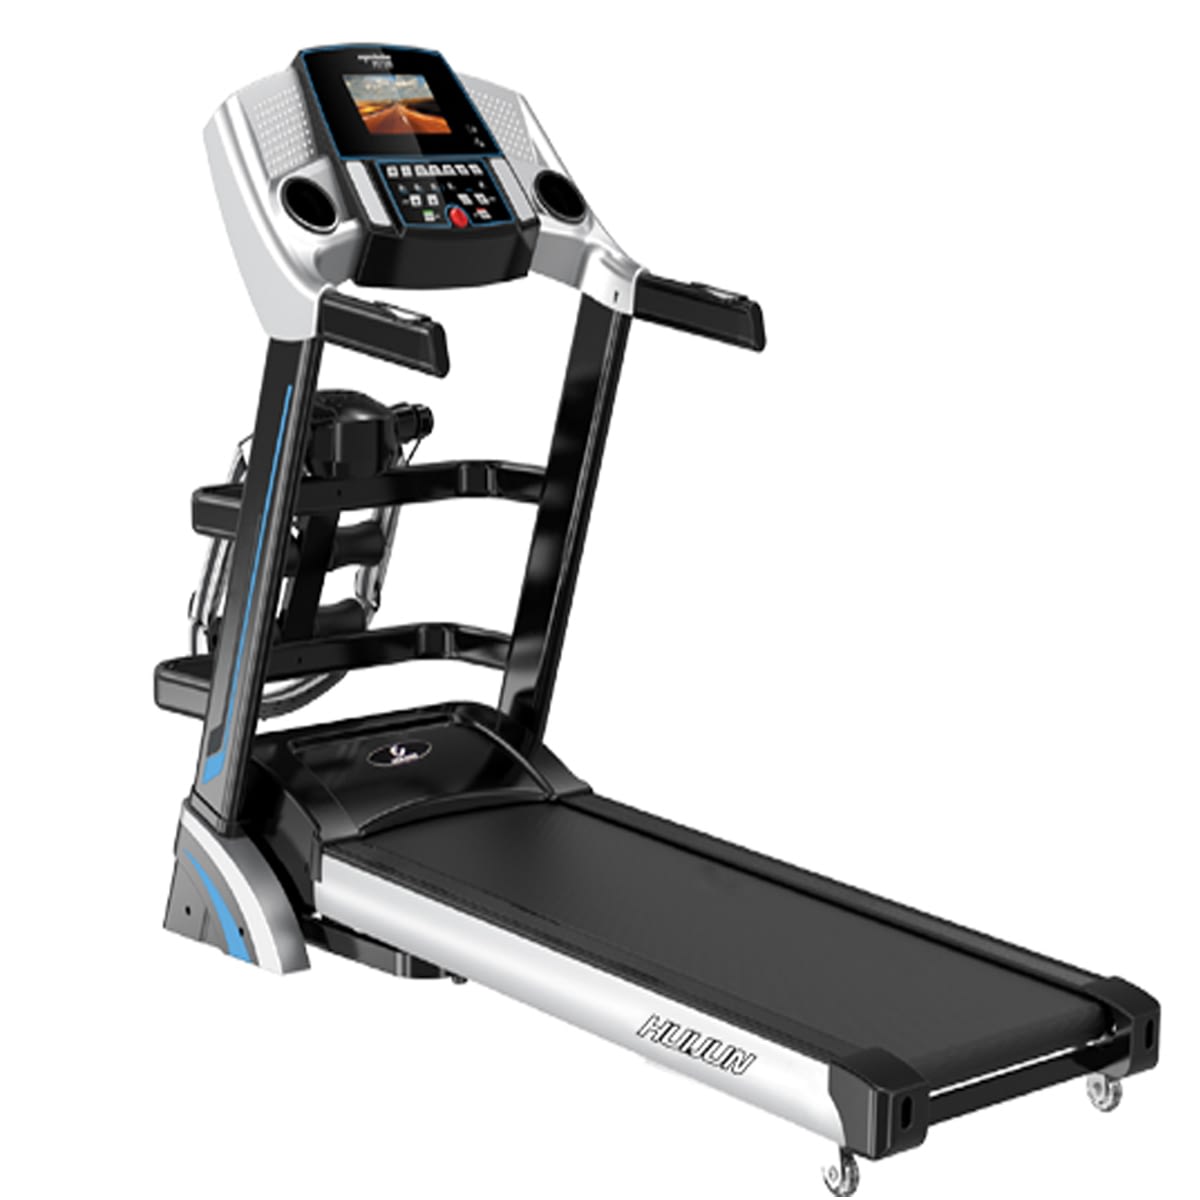 Buy Home Use Treadmill today at the best price | Goga